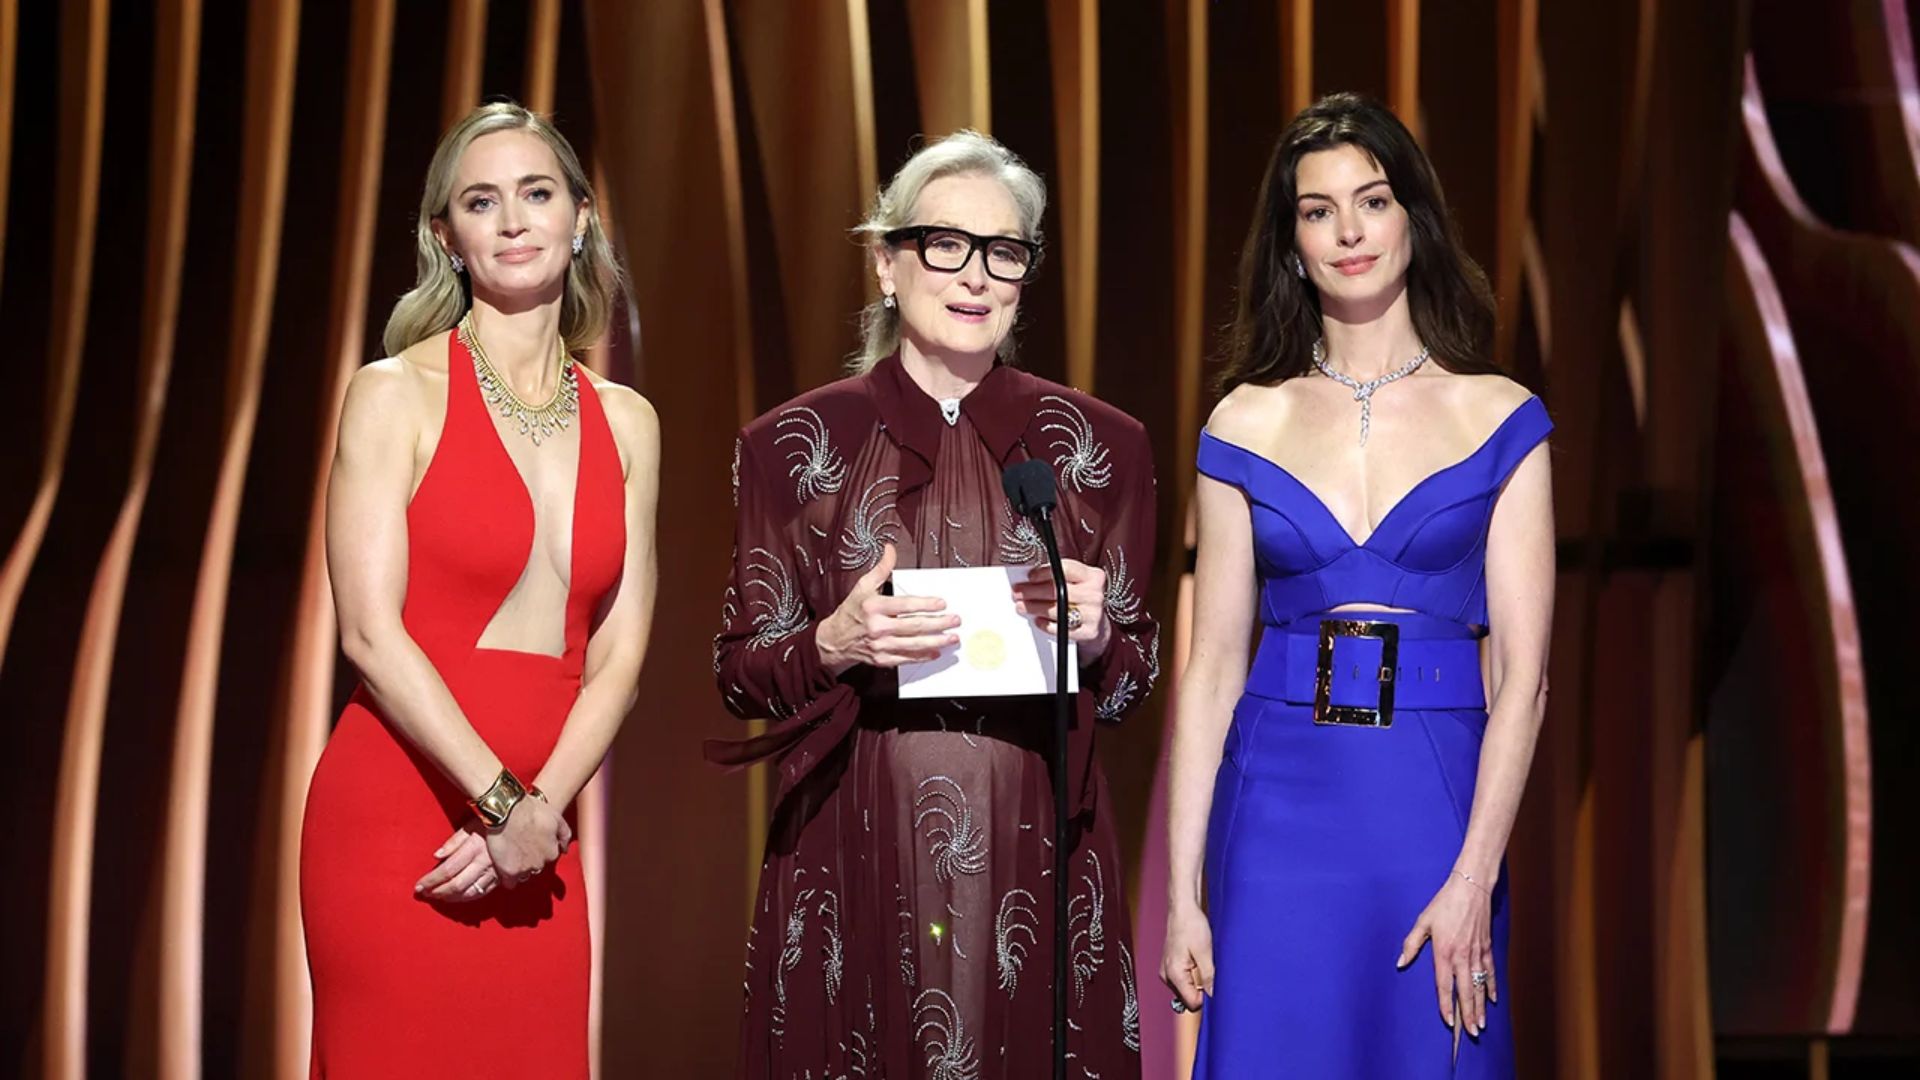 Anne Hathaway and Emily Blunt Reunite with Meryl Streep, Channel Miranda Priestly in Hilarious SAG Awards Video